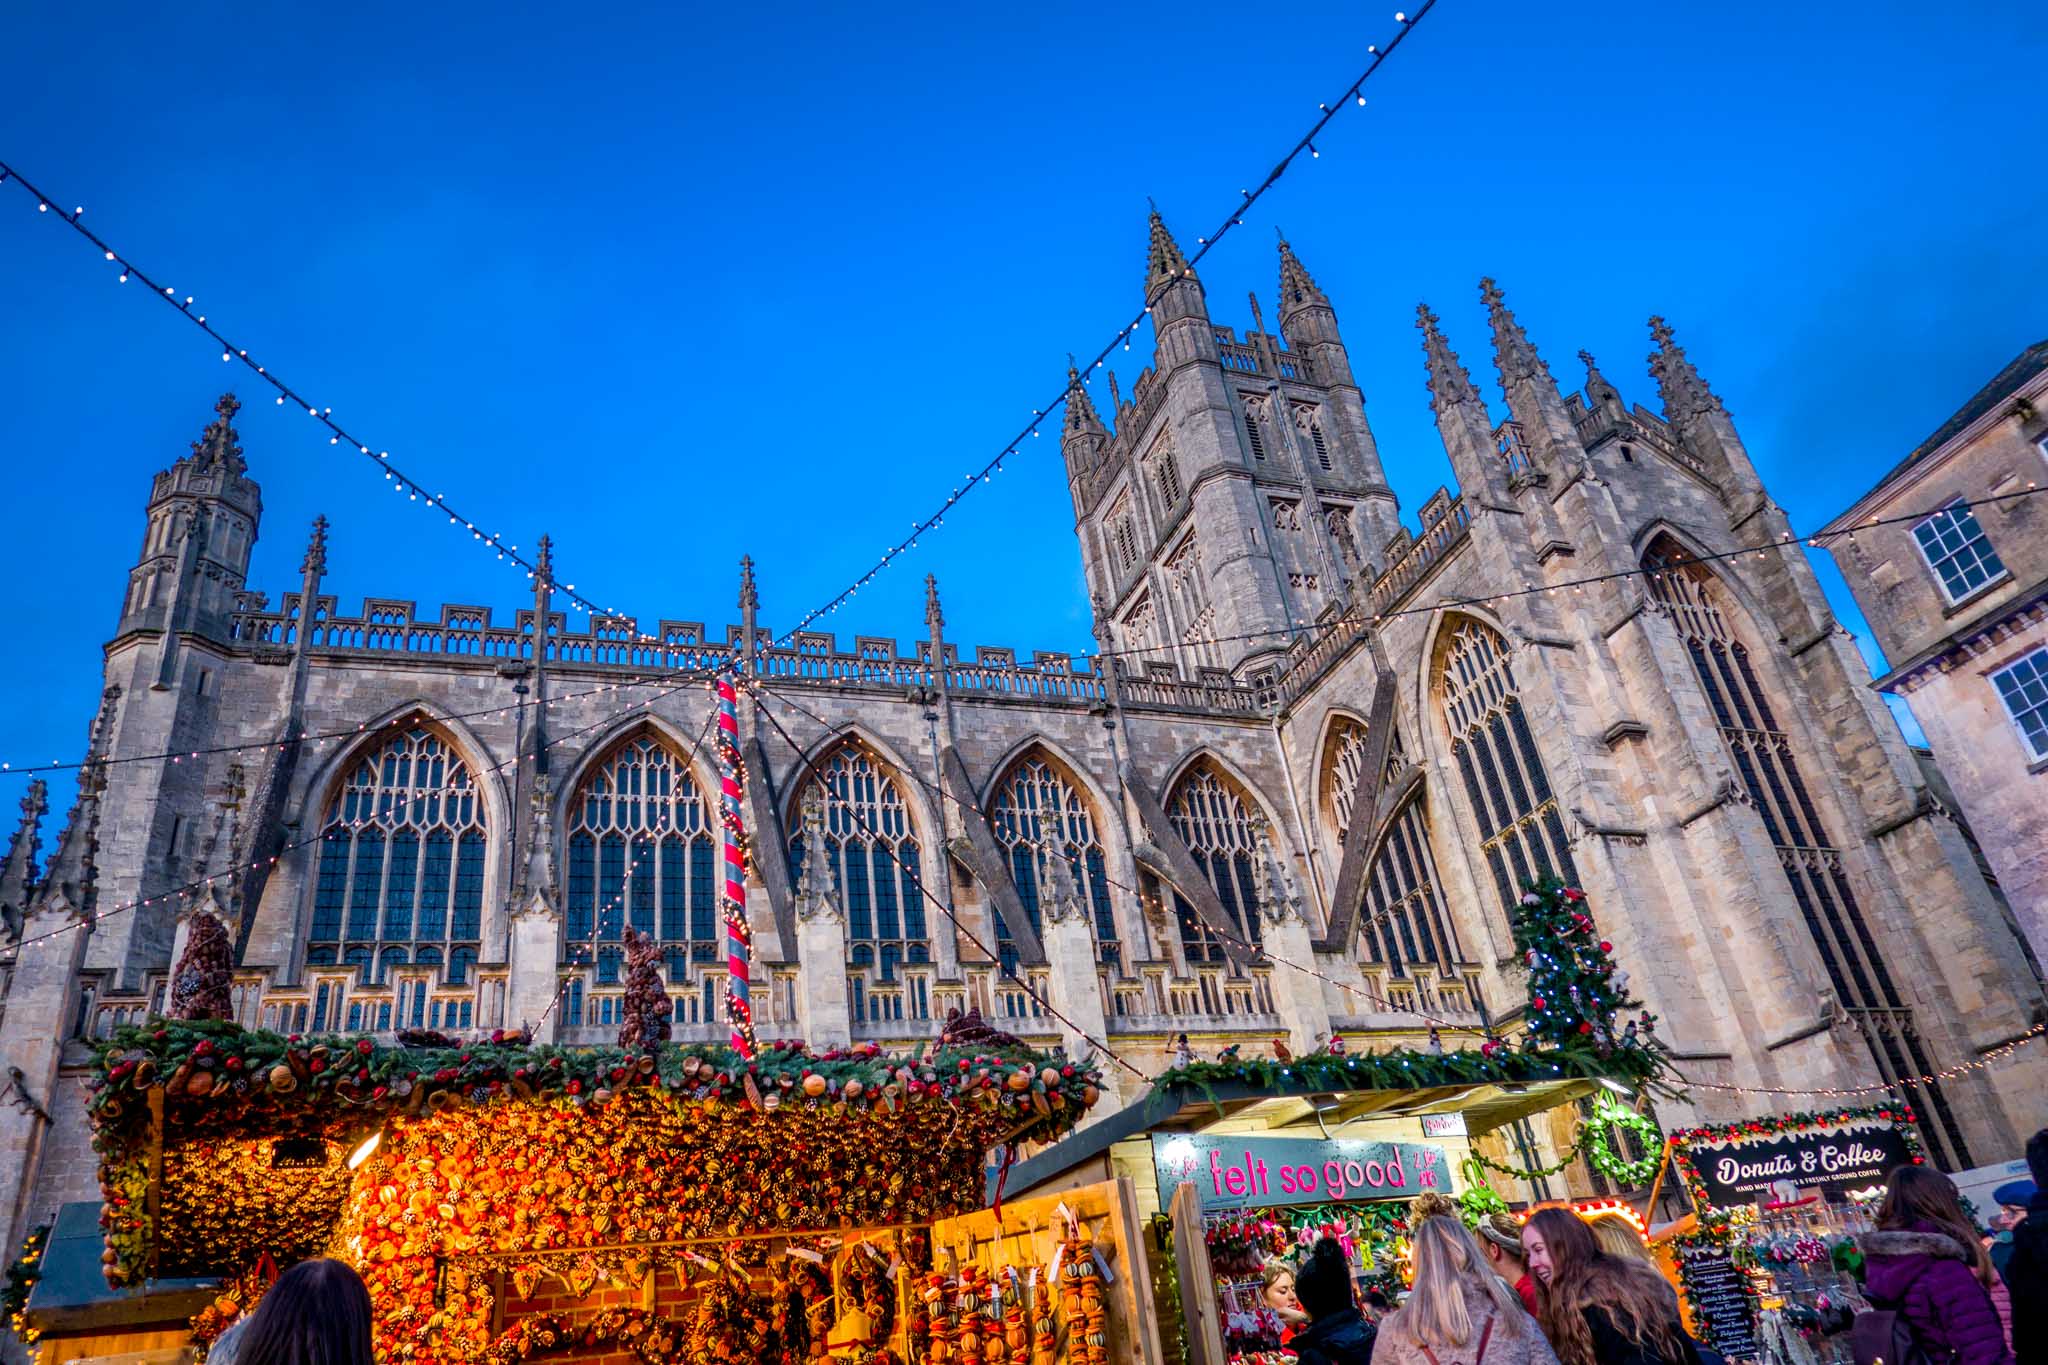 Stalls of the Bath Christmas market lit up at sunset in front of the large stone Bath Abbey